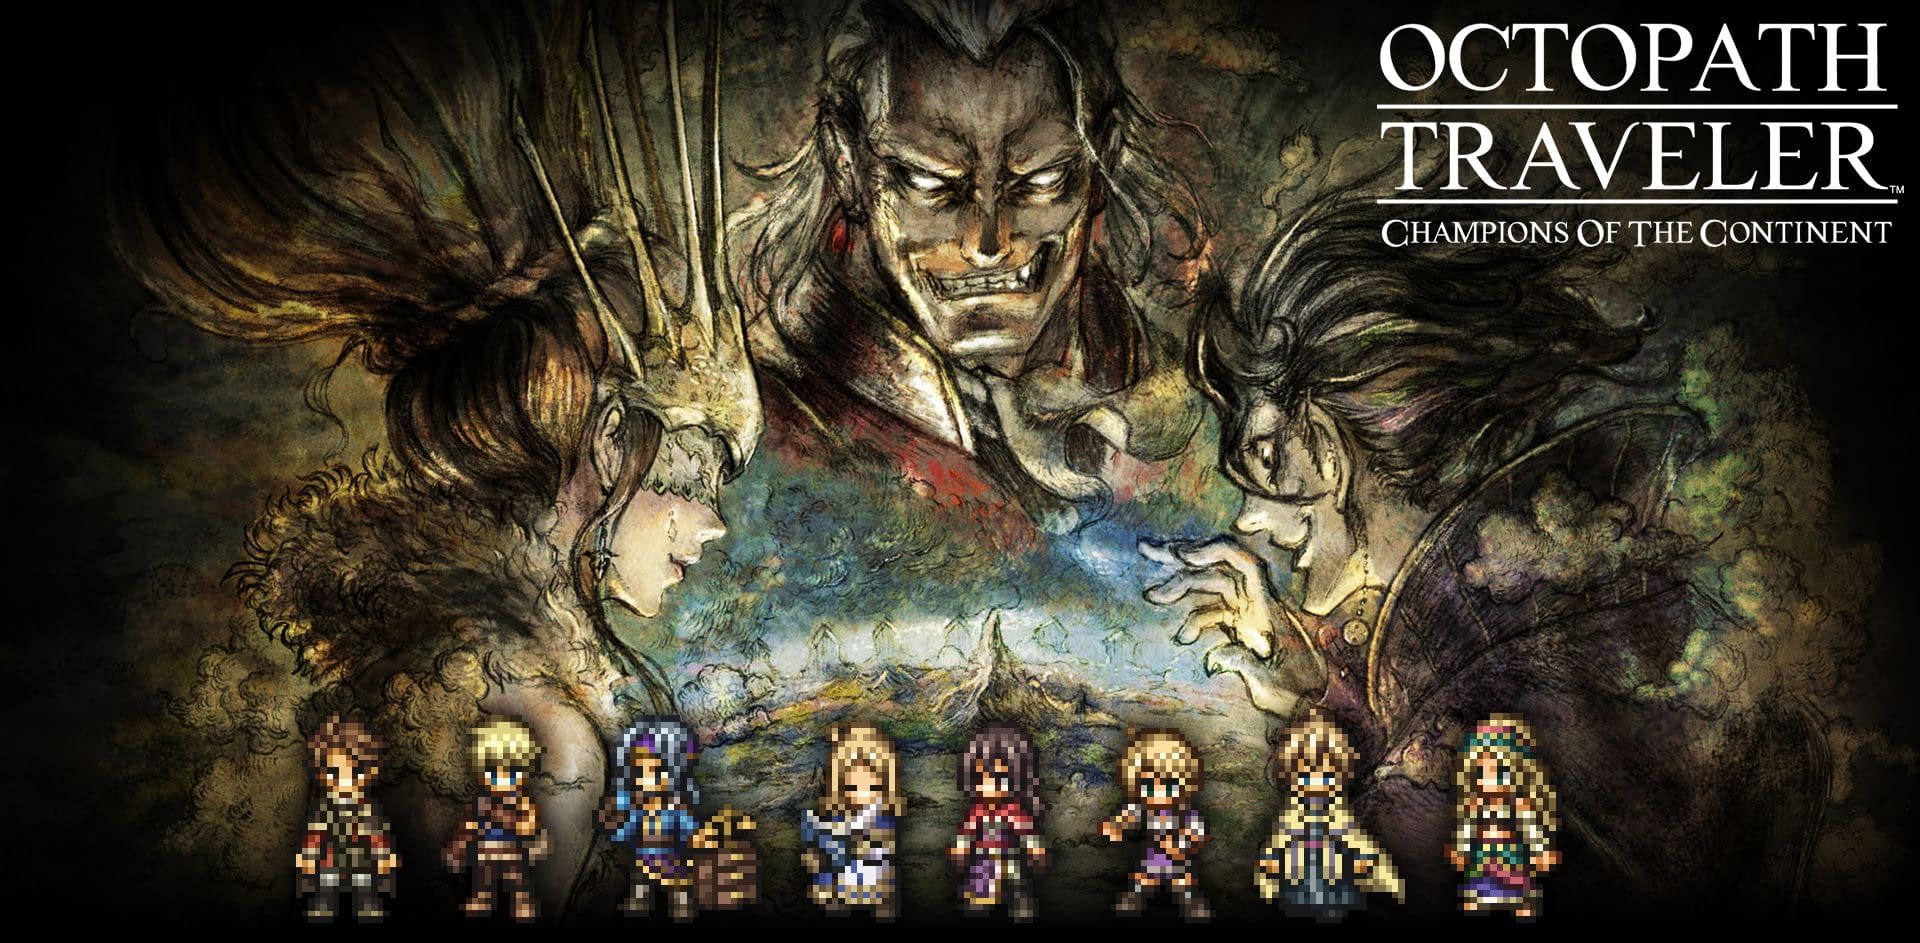 OCTOPATH TRAVELER: CHAMPIONS OF THE CONTINENT FIRST ANNIVERSARY BRINGS NEW  STORY CONTENT, REWARDS, CHAMPIONS AND MORE - Square Enix North America  Press Hub